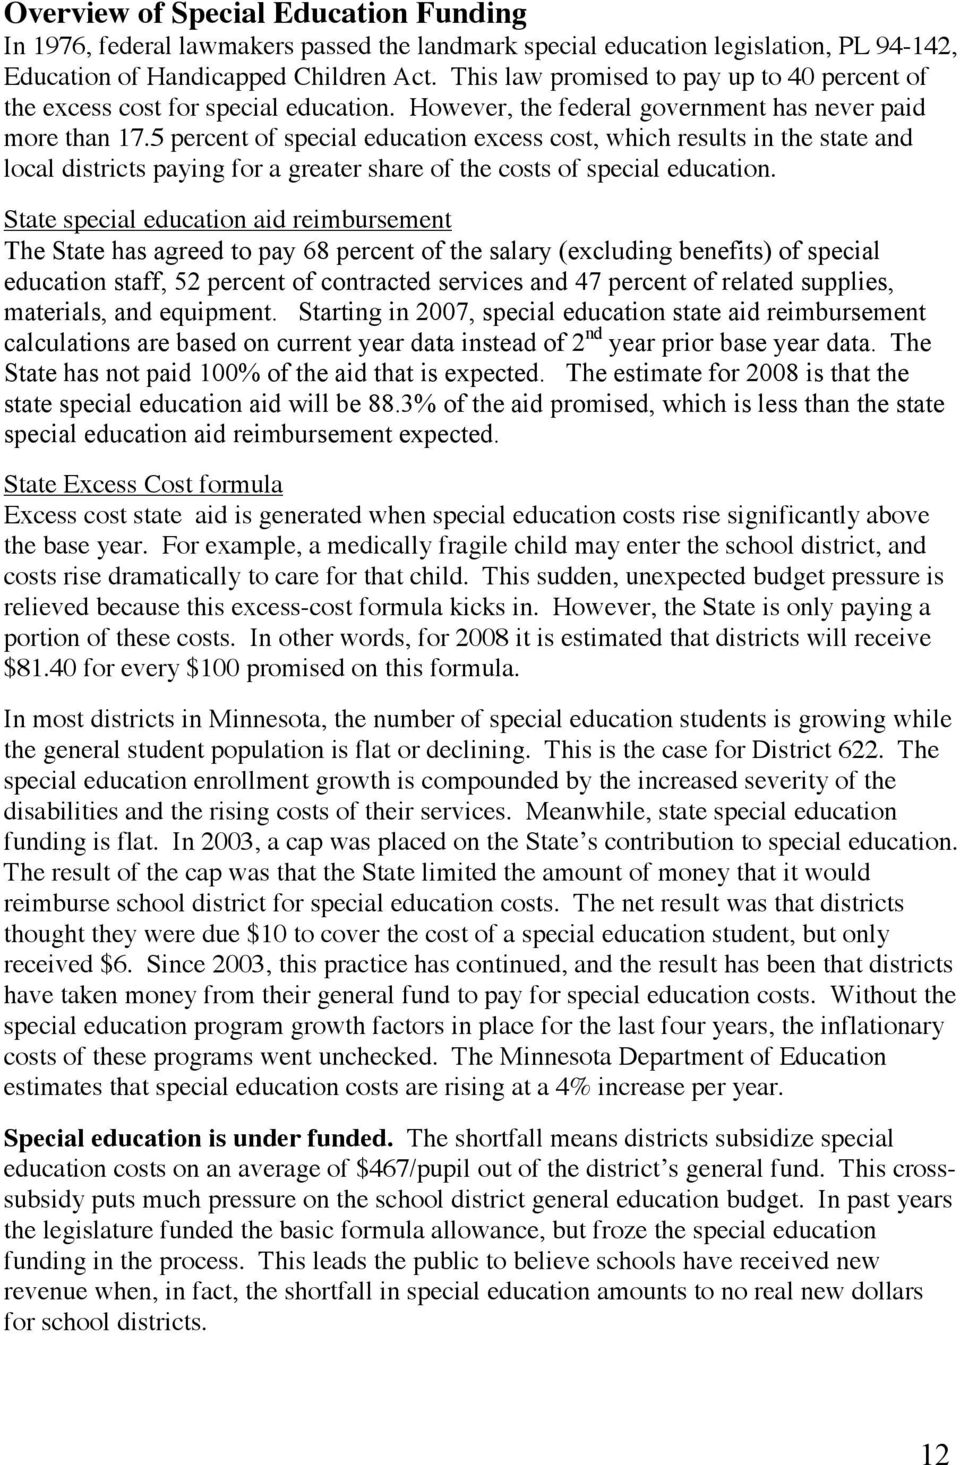 5 percent of special education excess cost, which results in the state and local districts paying for a greater share of the costs of special education.